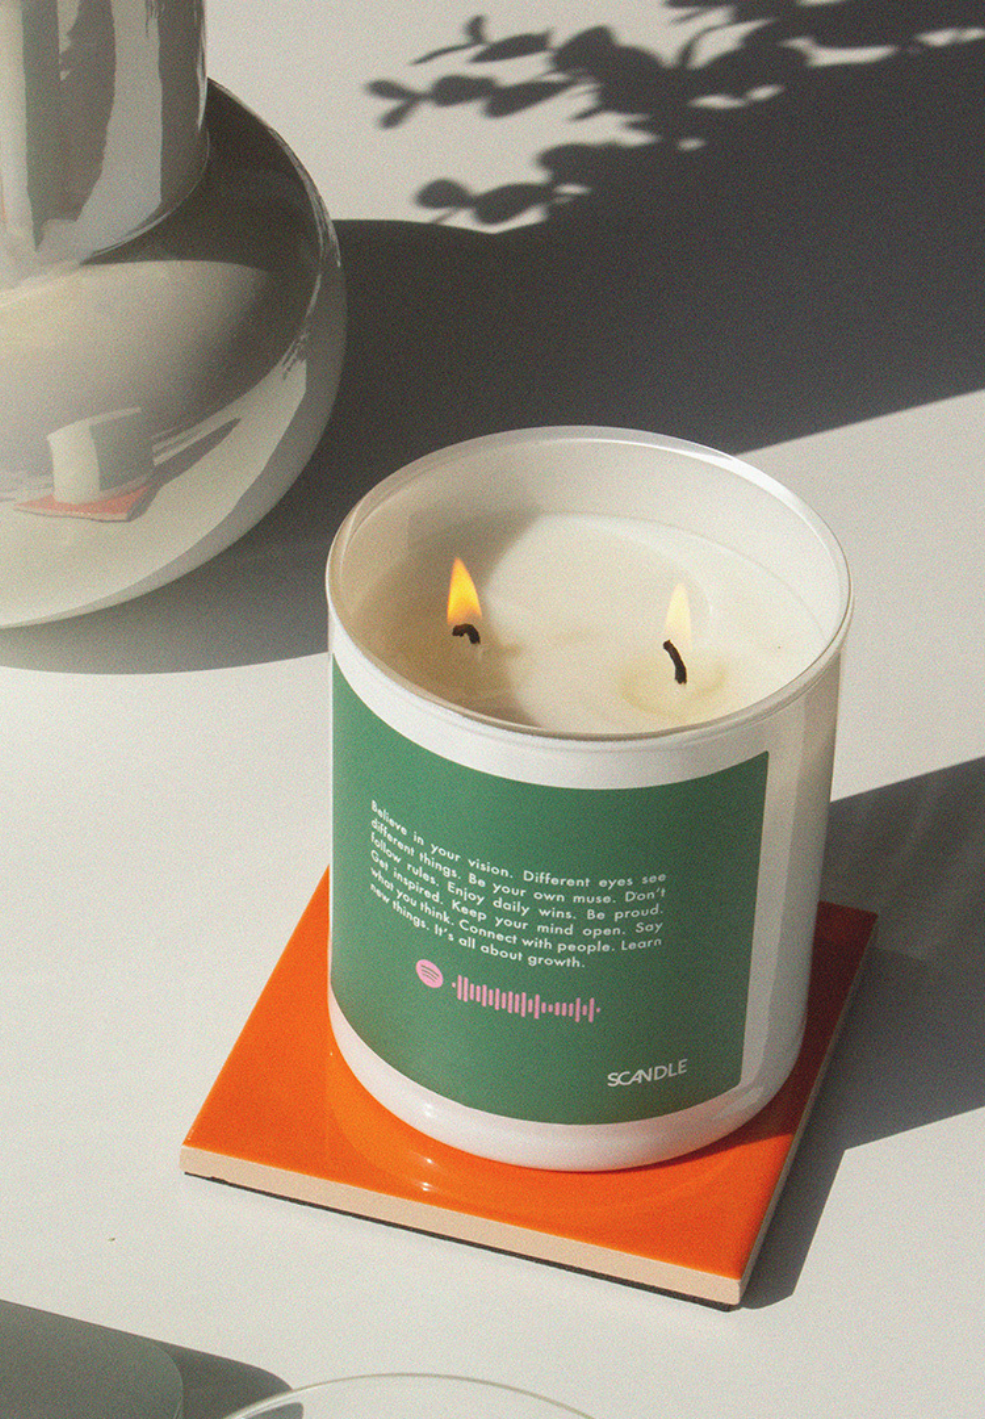 Creative Minds Scented Candle